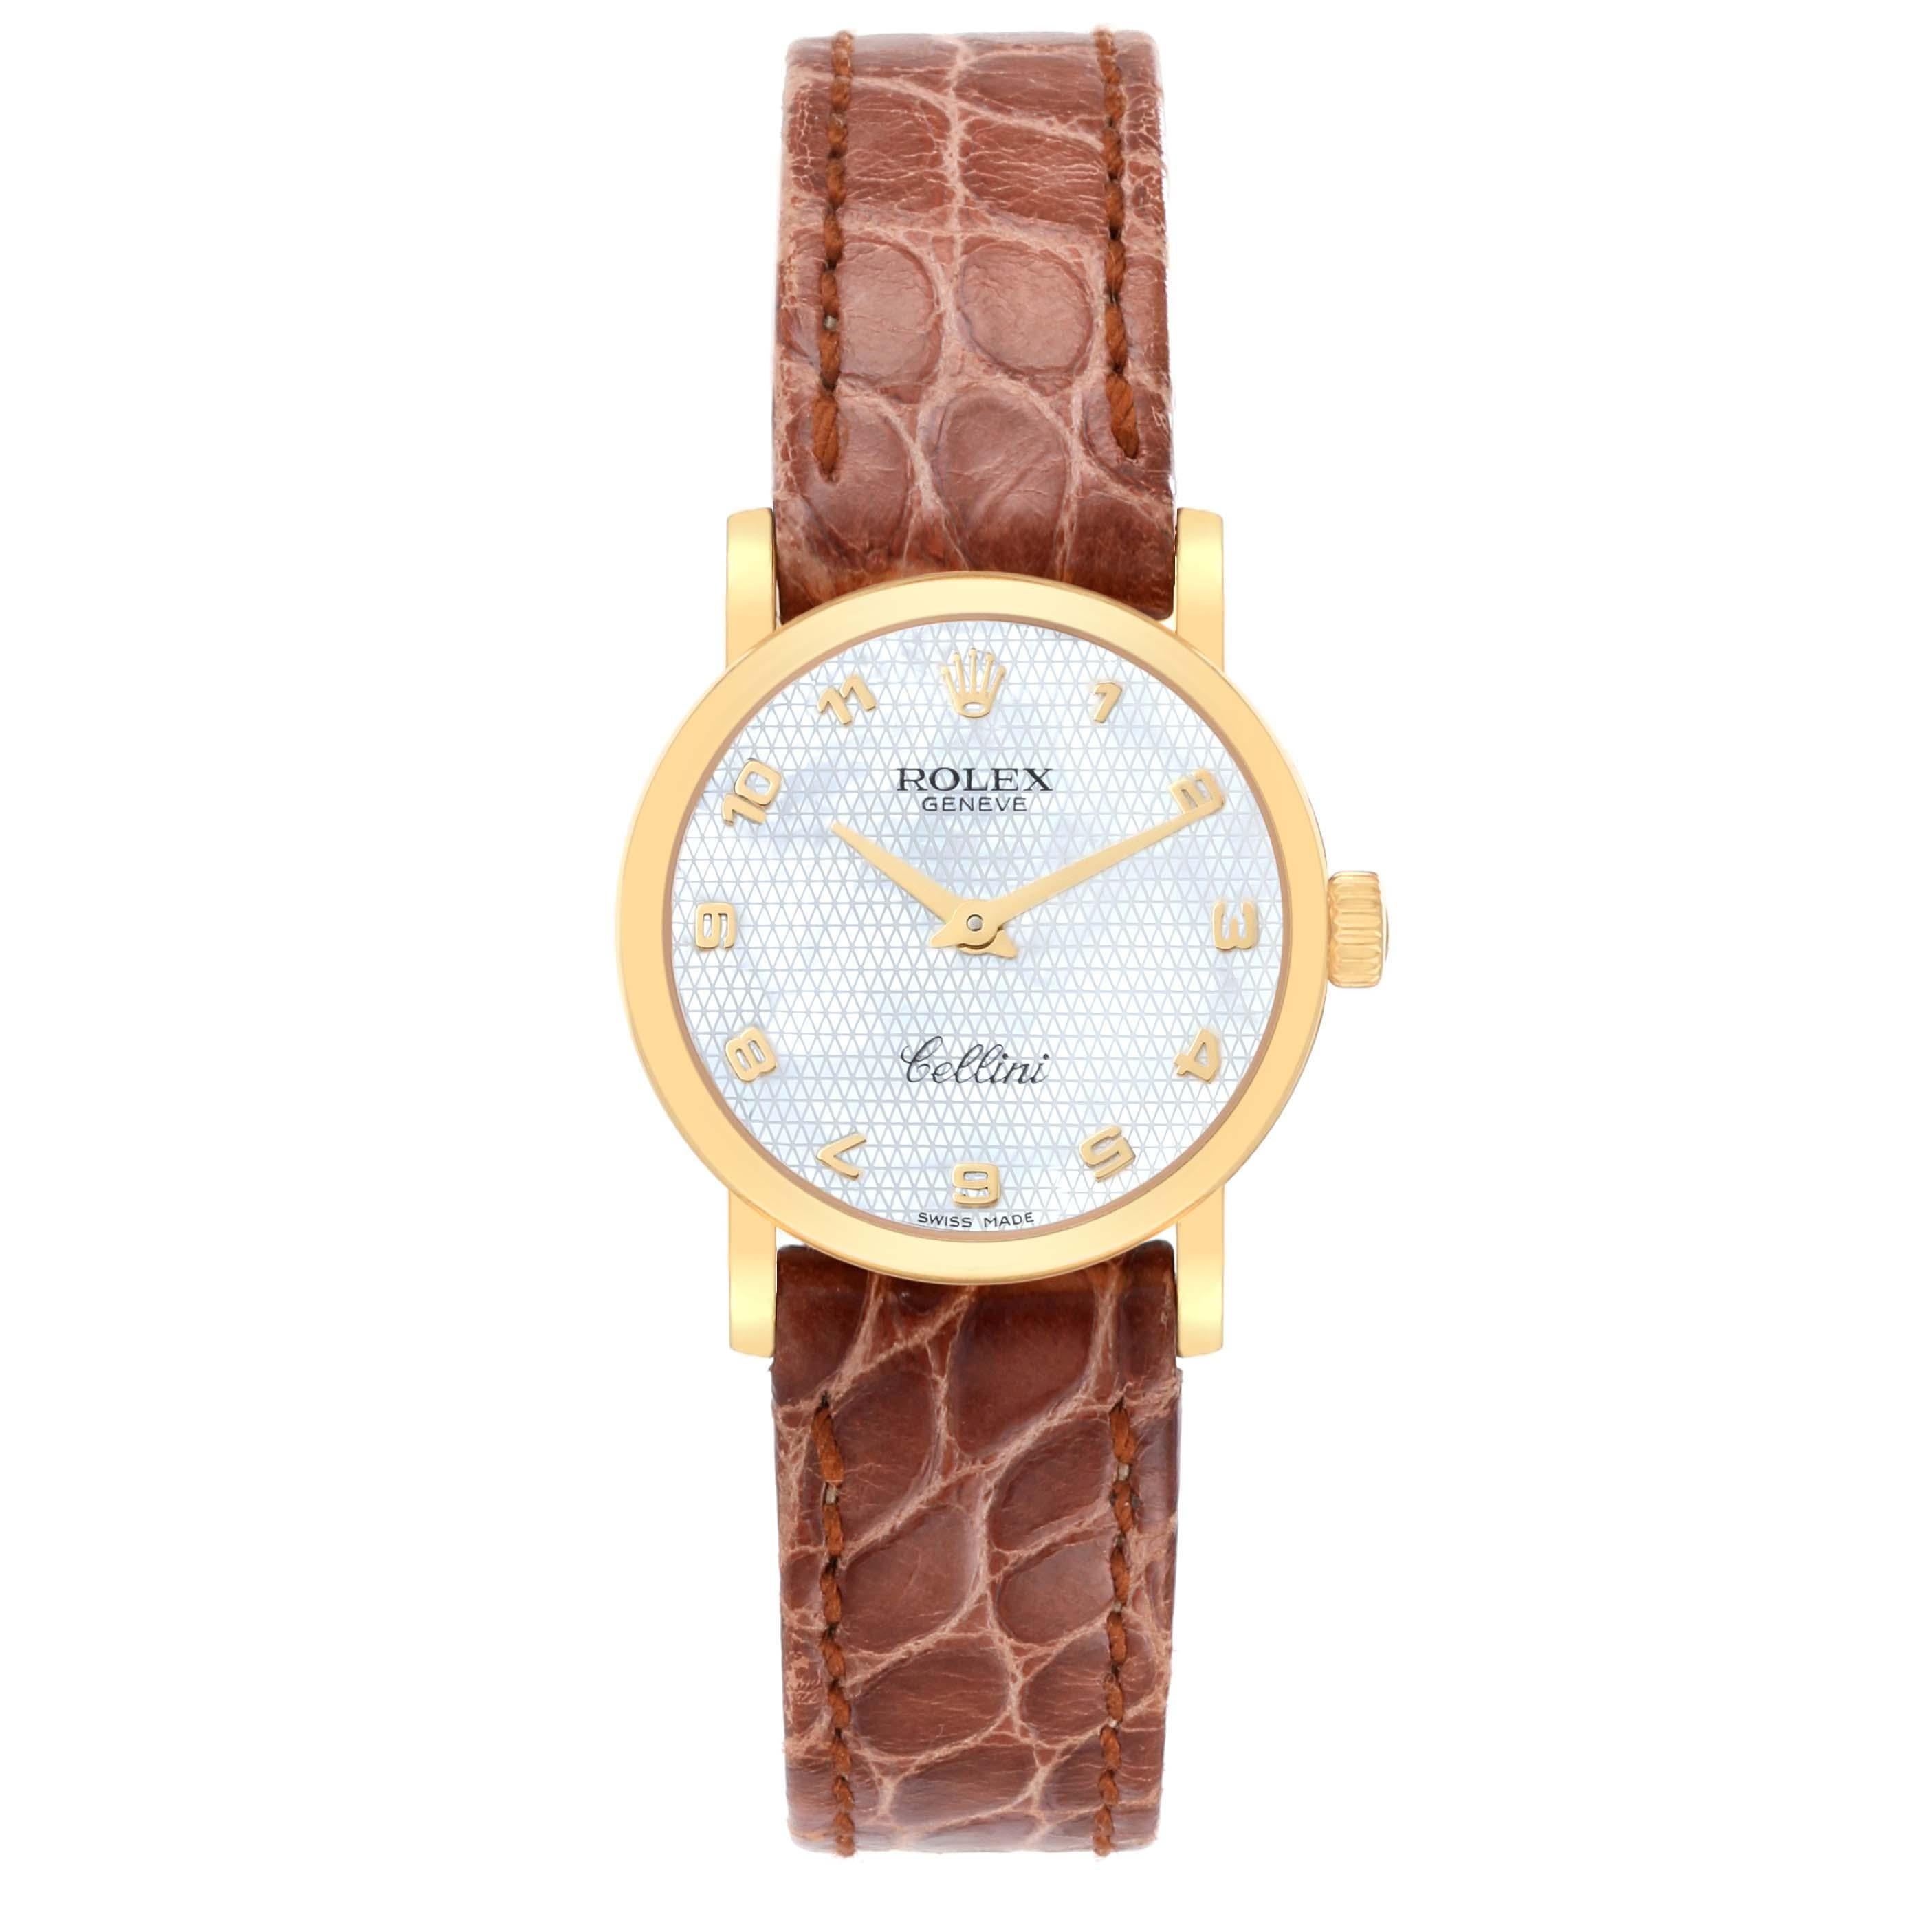 Rolex Cellini Classic Yellow Gold Mother Of Pearl Dial Ladies Watch 6110 Unworn. Quartz movement. 18k yellow gold slim case 26.0 mm in diameter. . Scratch resistant sapphire crystal. Flat profile. Mother of Pearl dial with raised Arabic numeral hour